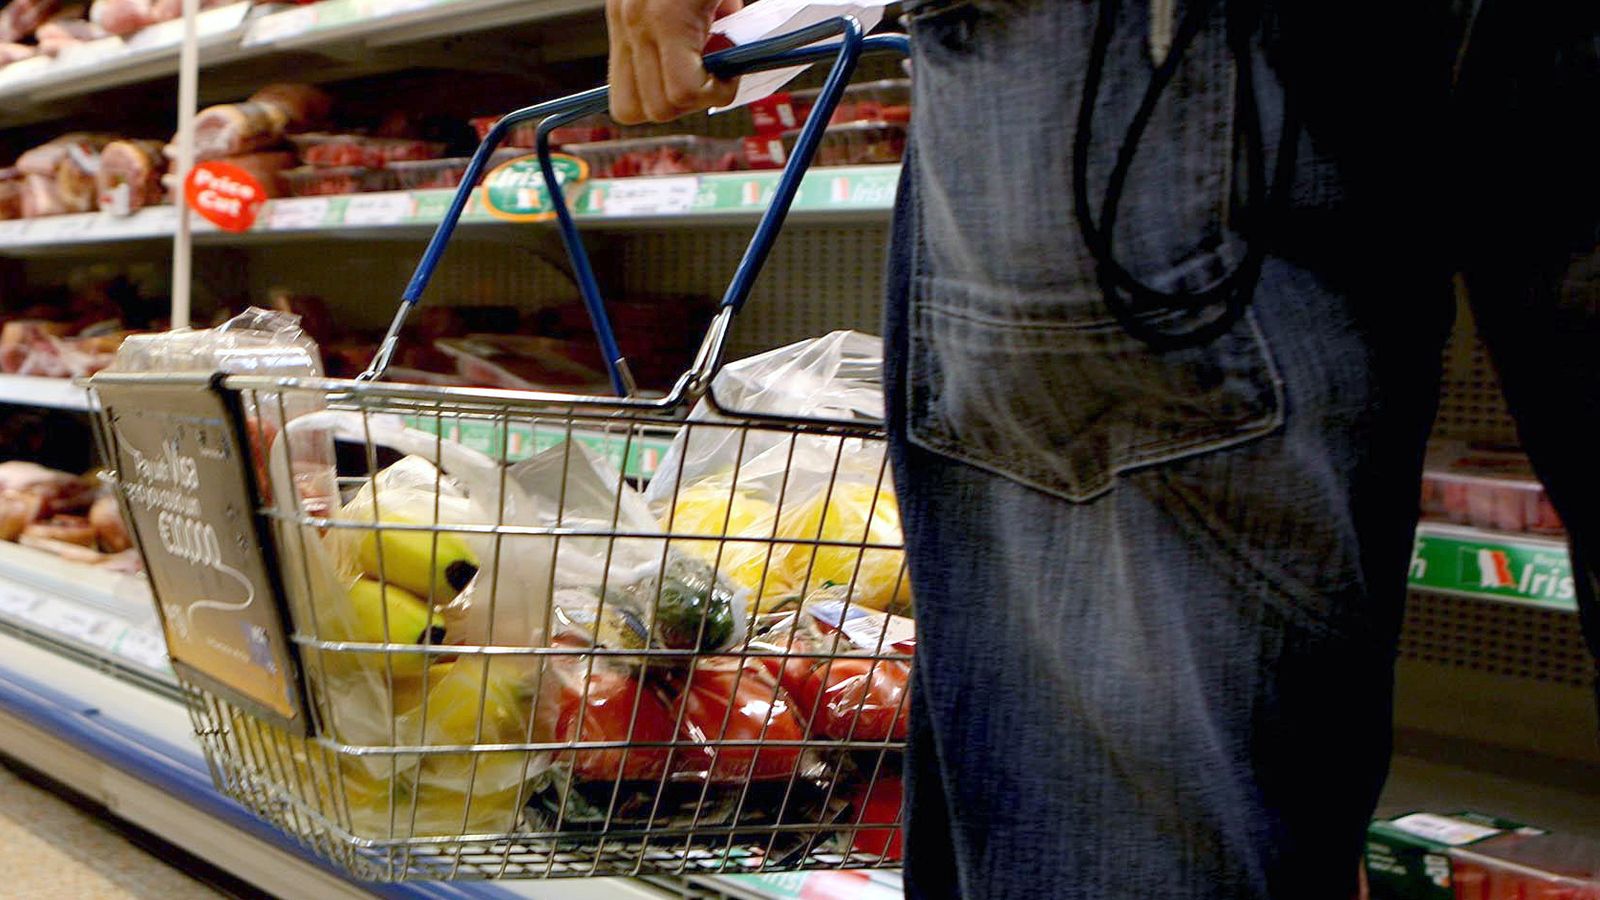 Government Considering Cap on Basic Food Prices Amid Rising Costs